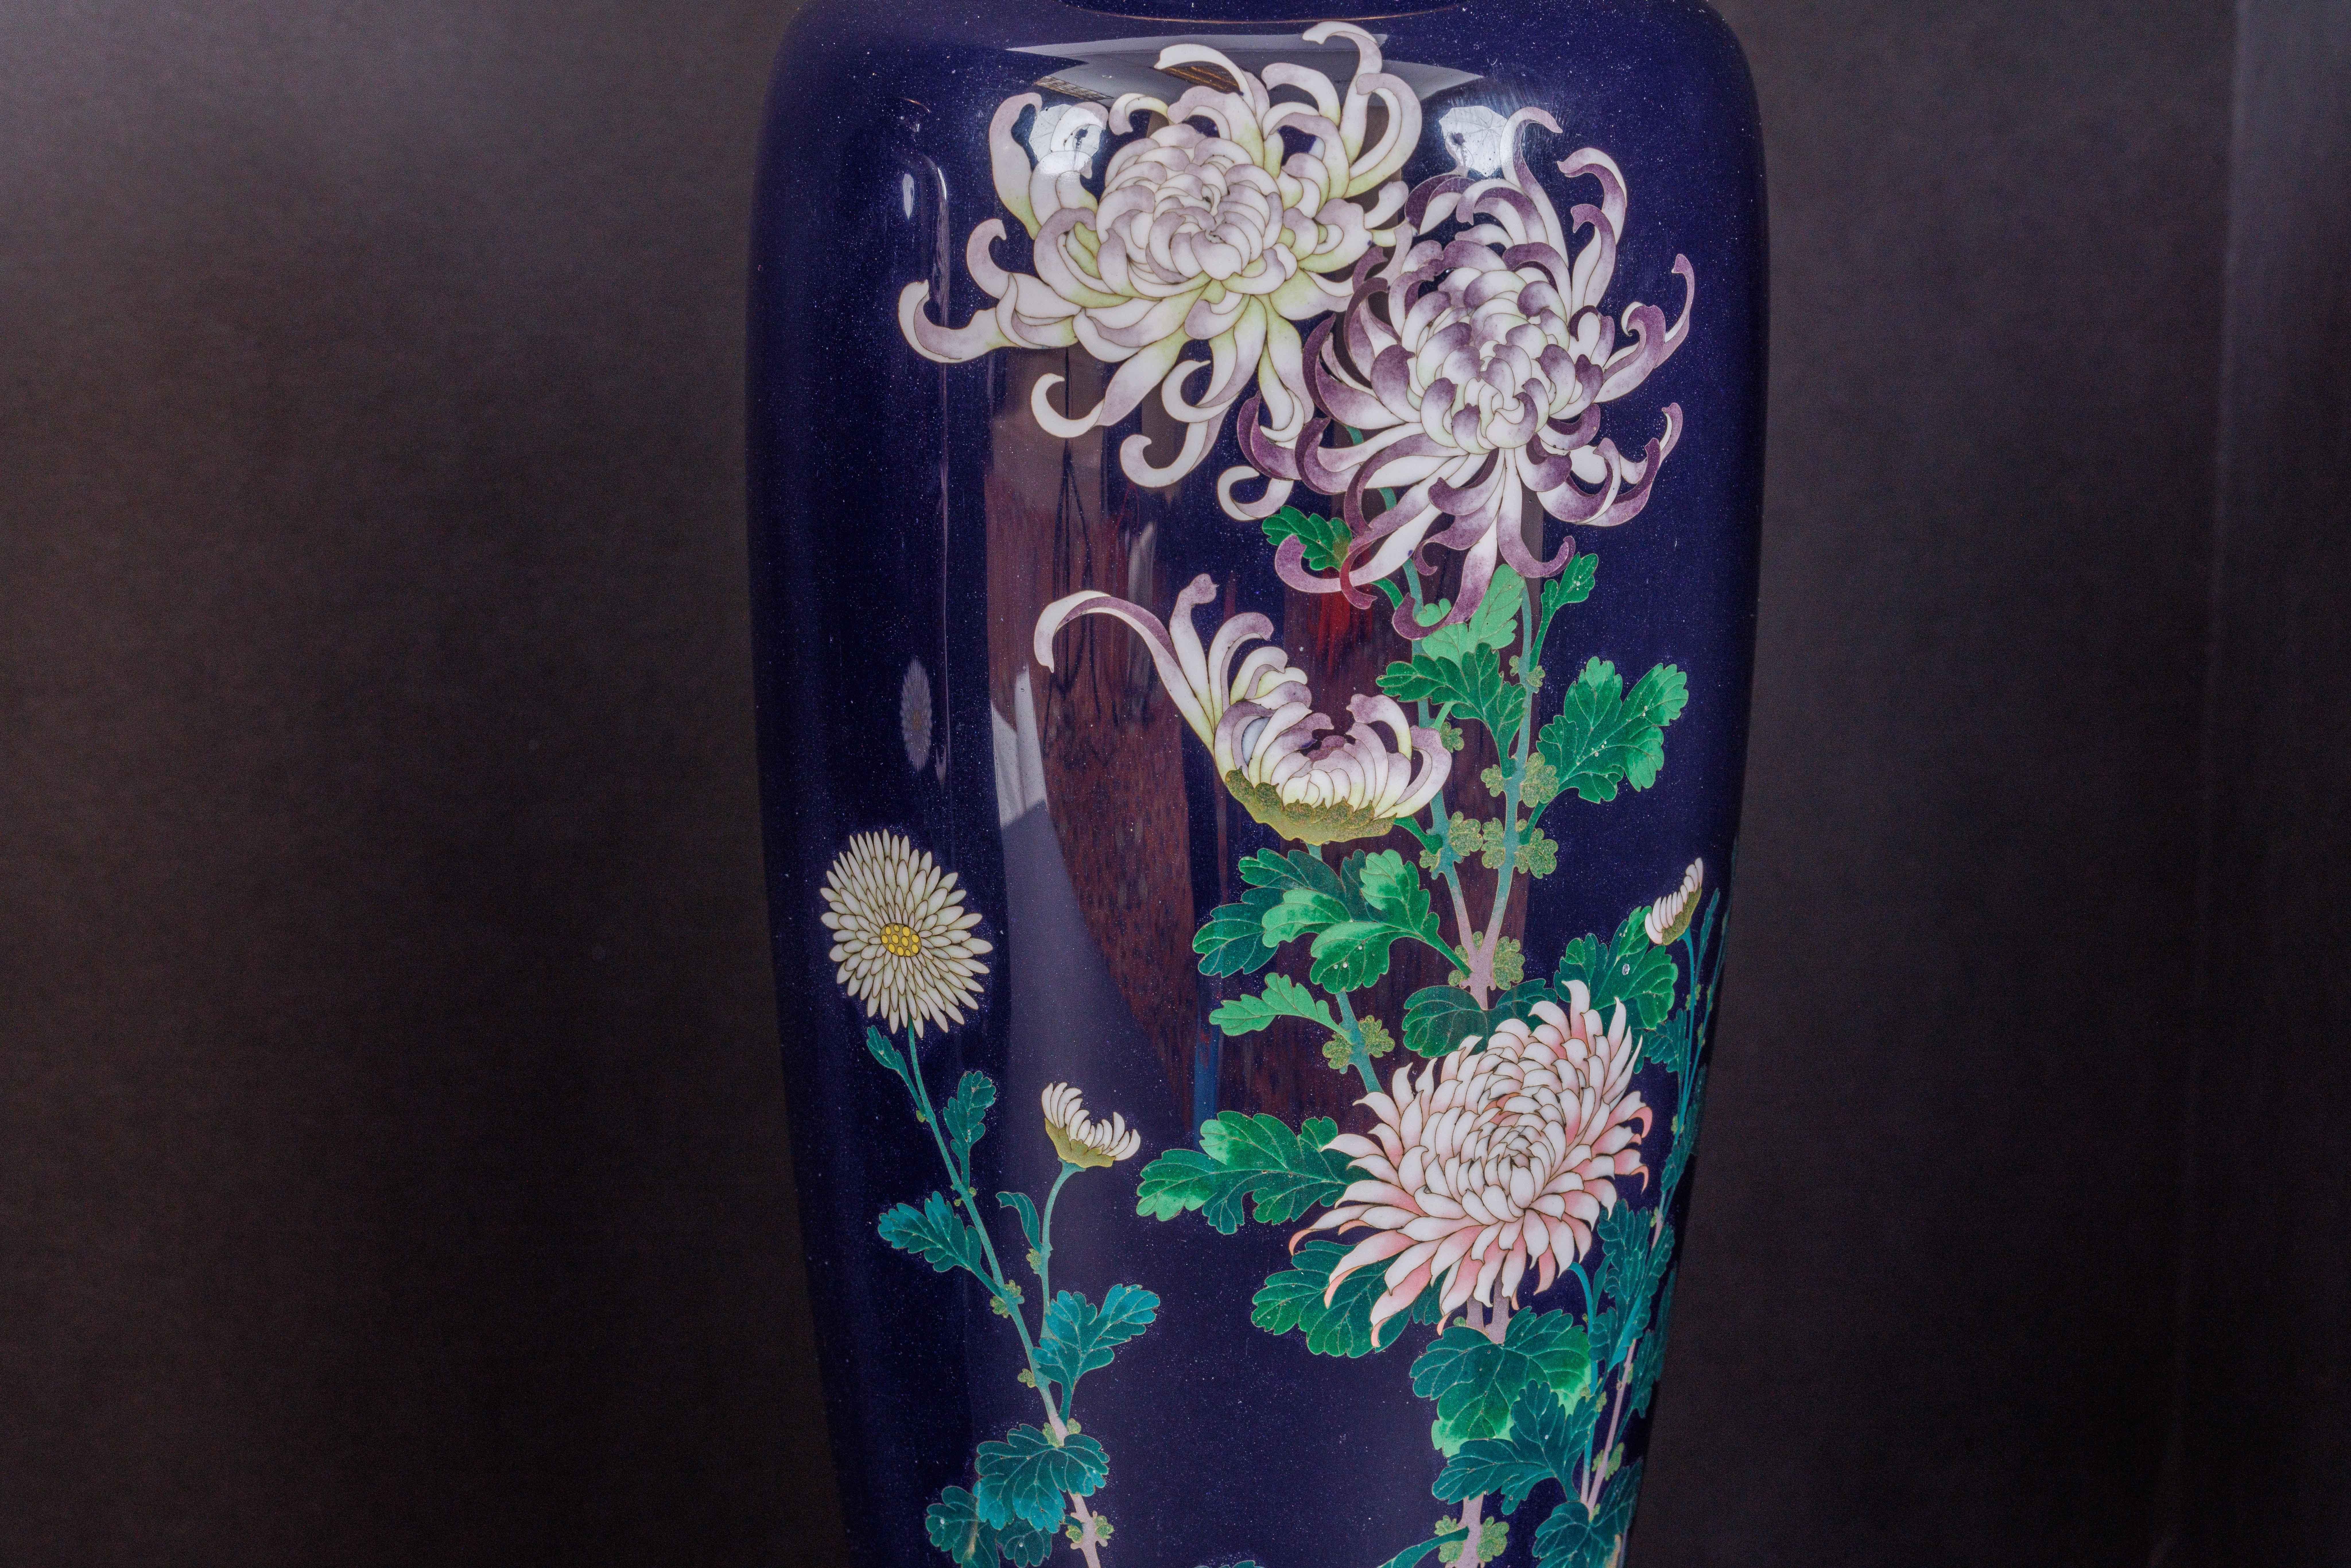 19th Century An Exquisite Pair Of Japanese Cloisonné Enamel Vases with Chrysanthemum Blossoms For Sale